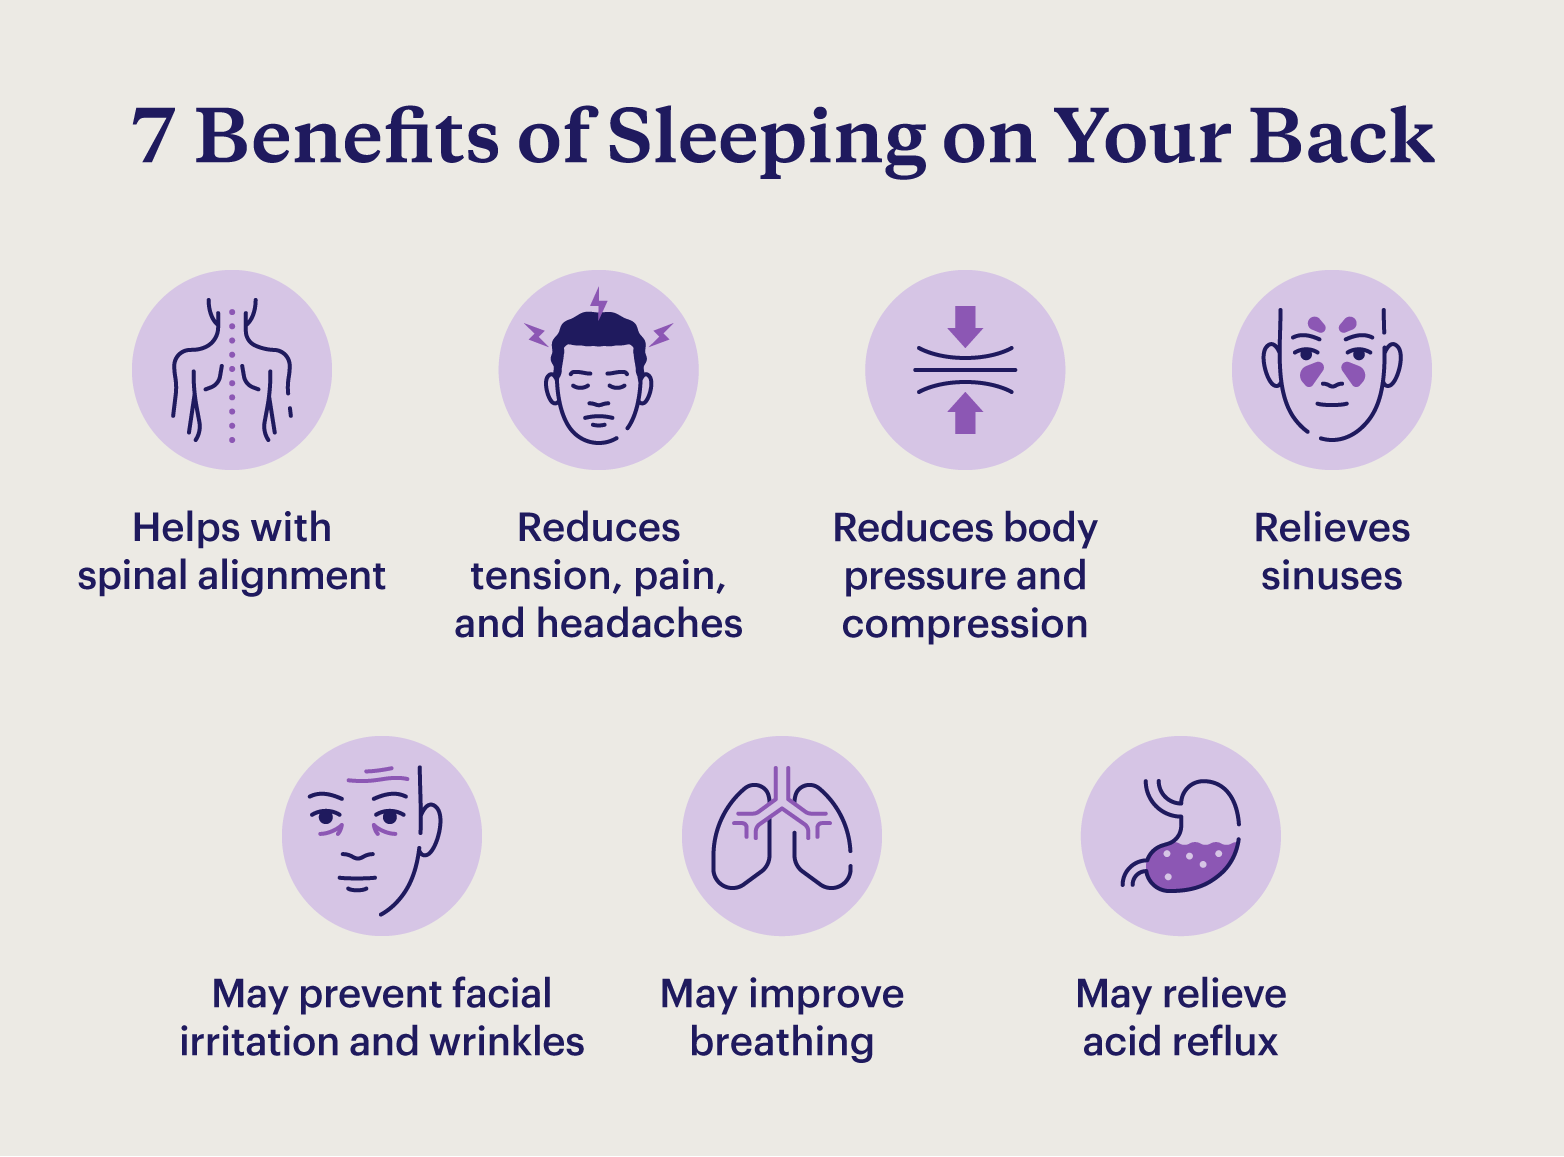 A graphic depicting 7 benefits of sleeping on your back.